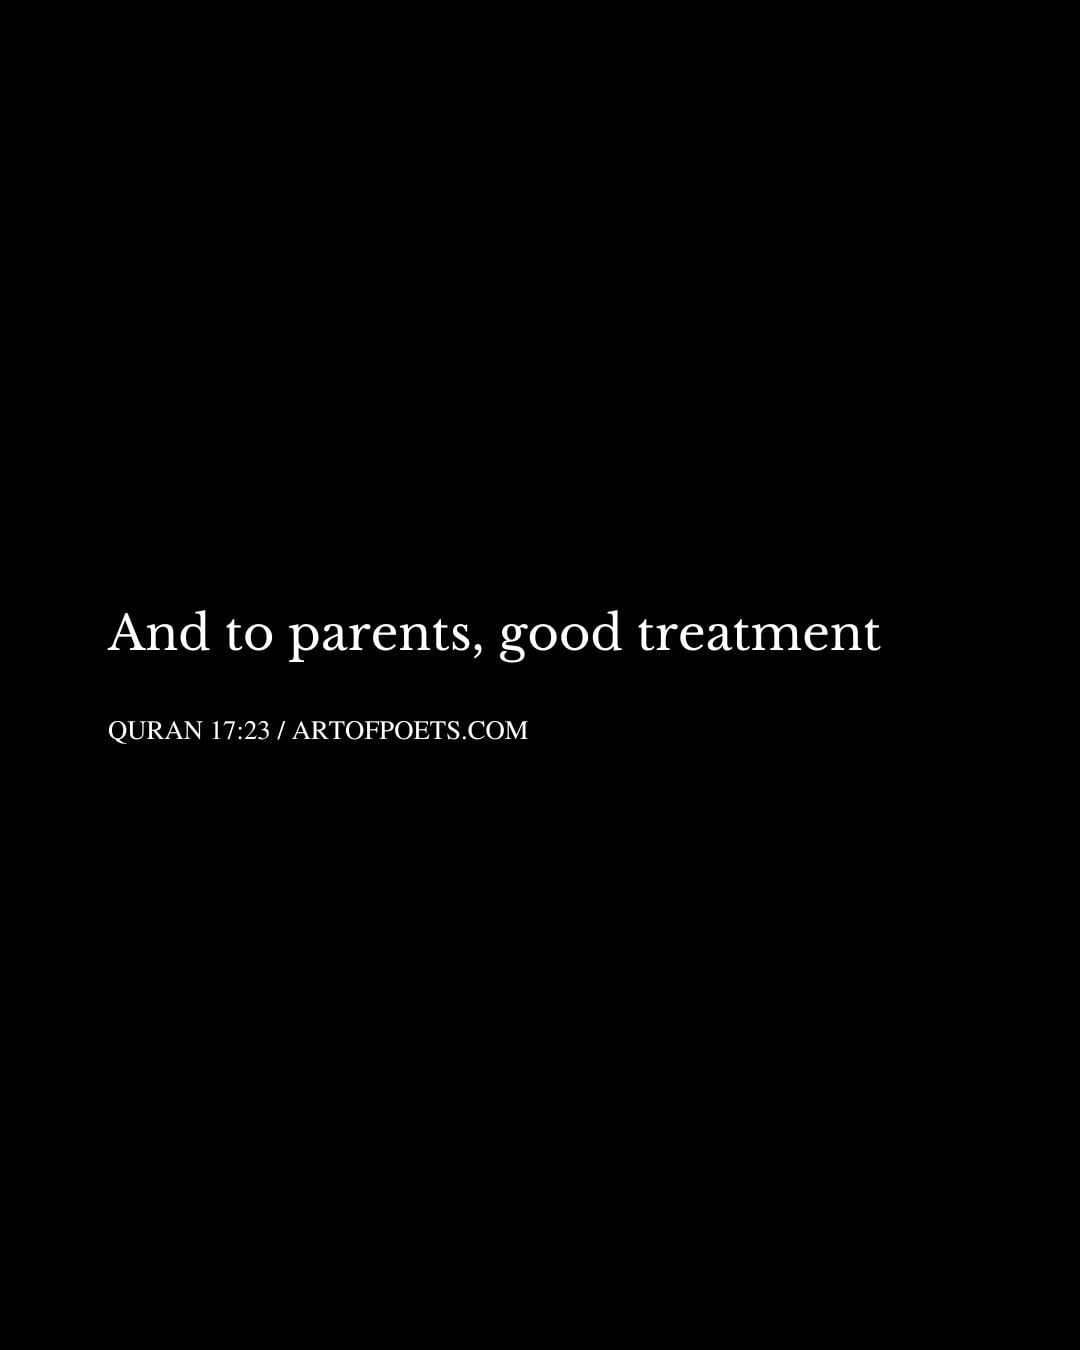 And to parents good treatment